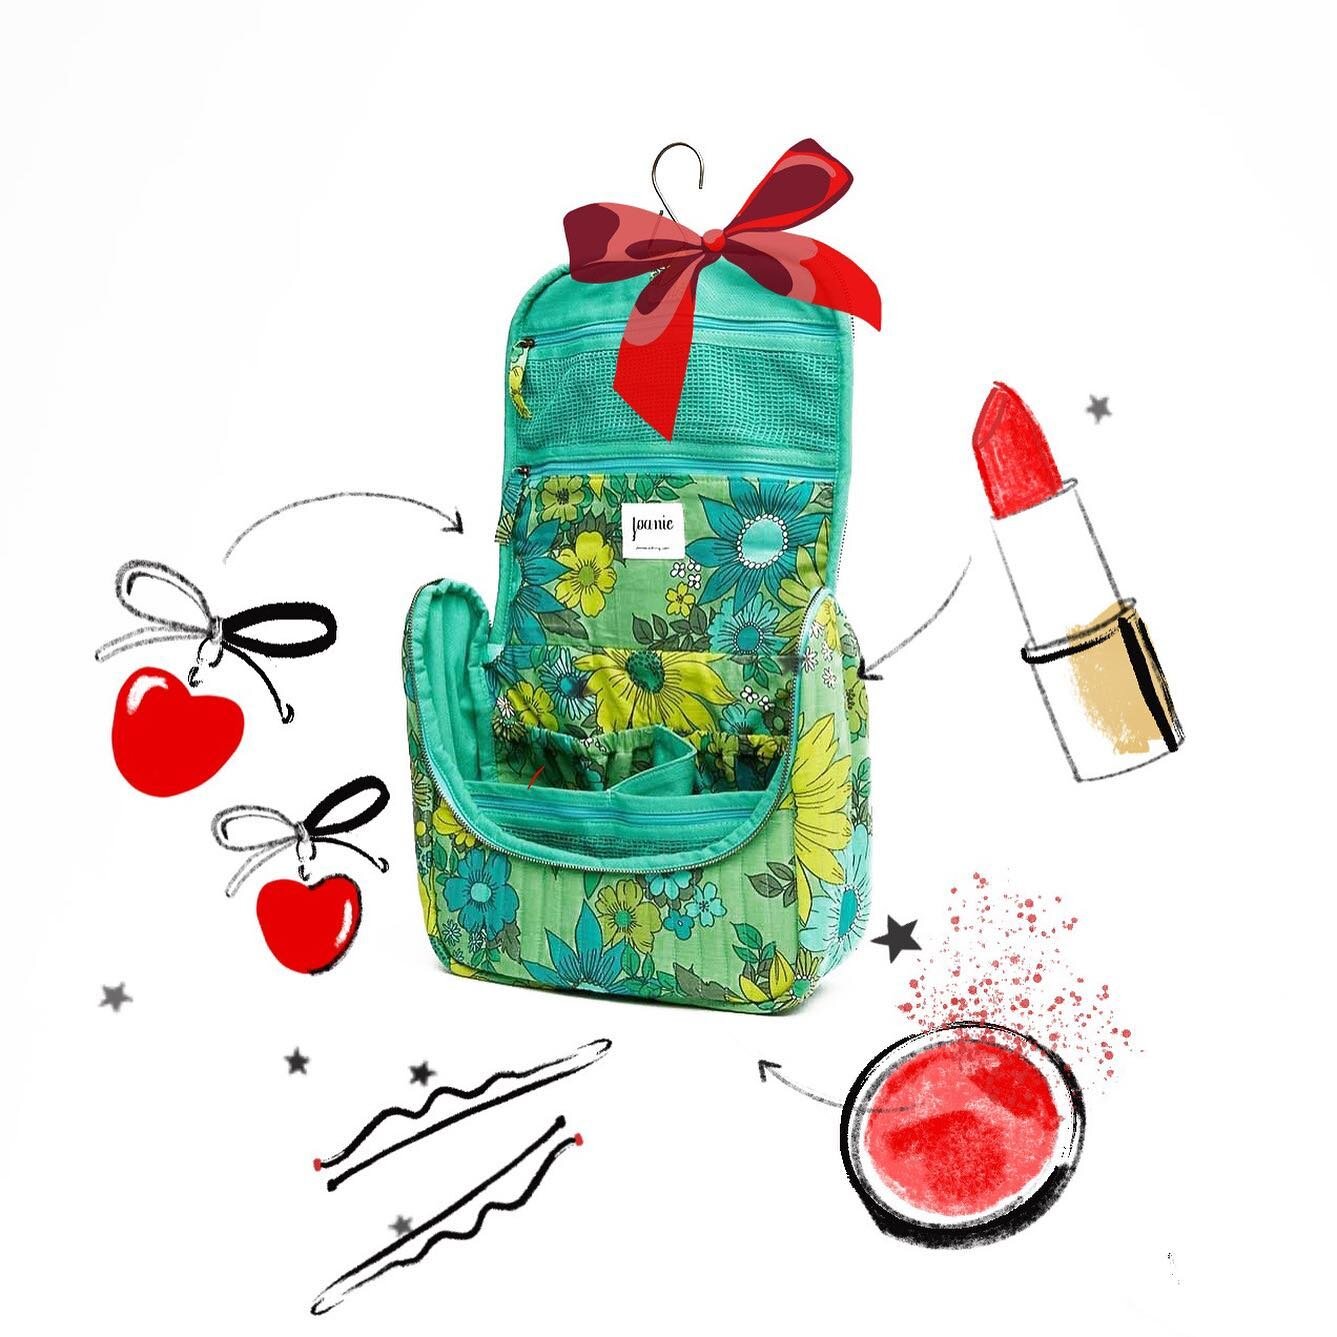 Joanie Deadstock makeup bag and what&rsquo;s in mine&hellip;..love this print, a big hit of summer 2023! @joanieclothing

#textiledesign #printdesigner #surfacepattern